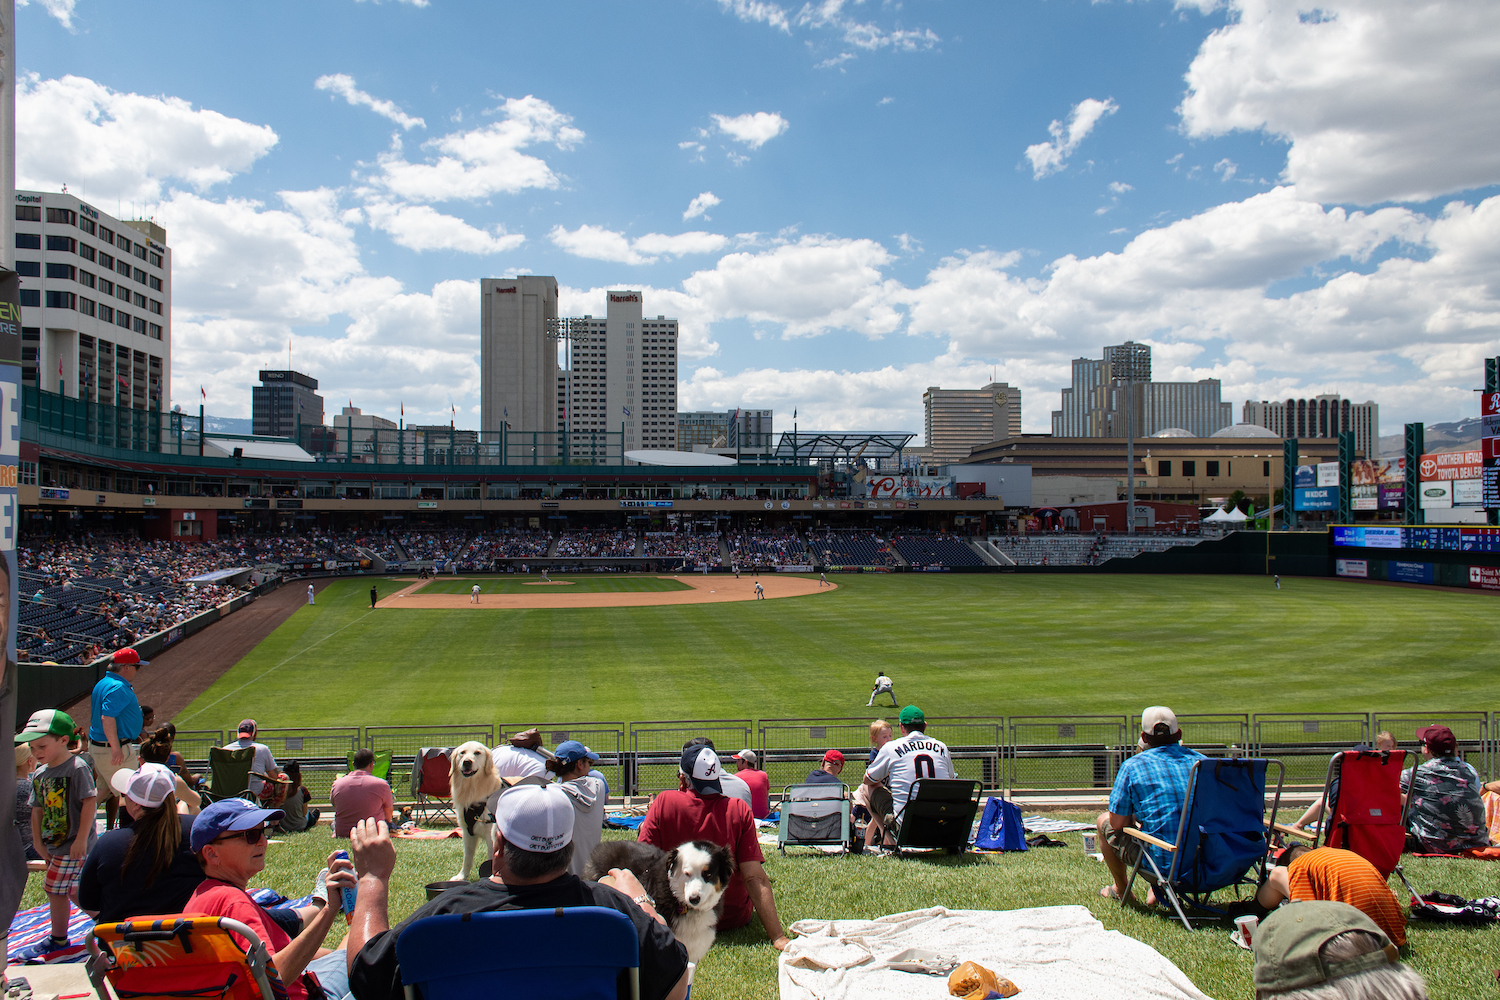 Wide shot of Reno Aces stadium during a baseball game.